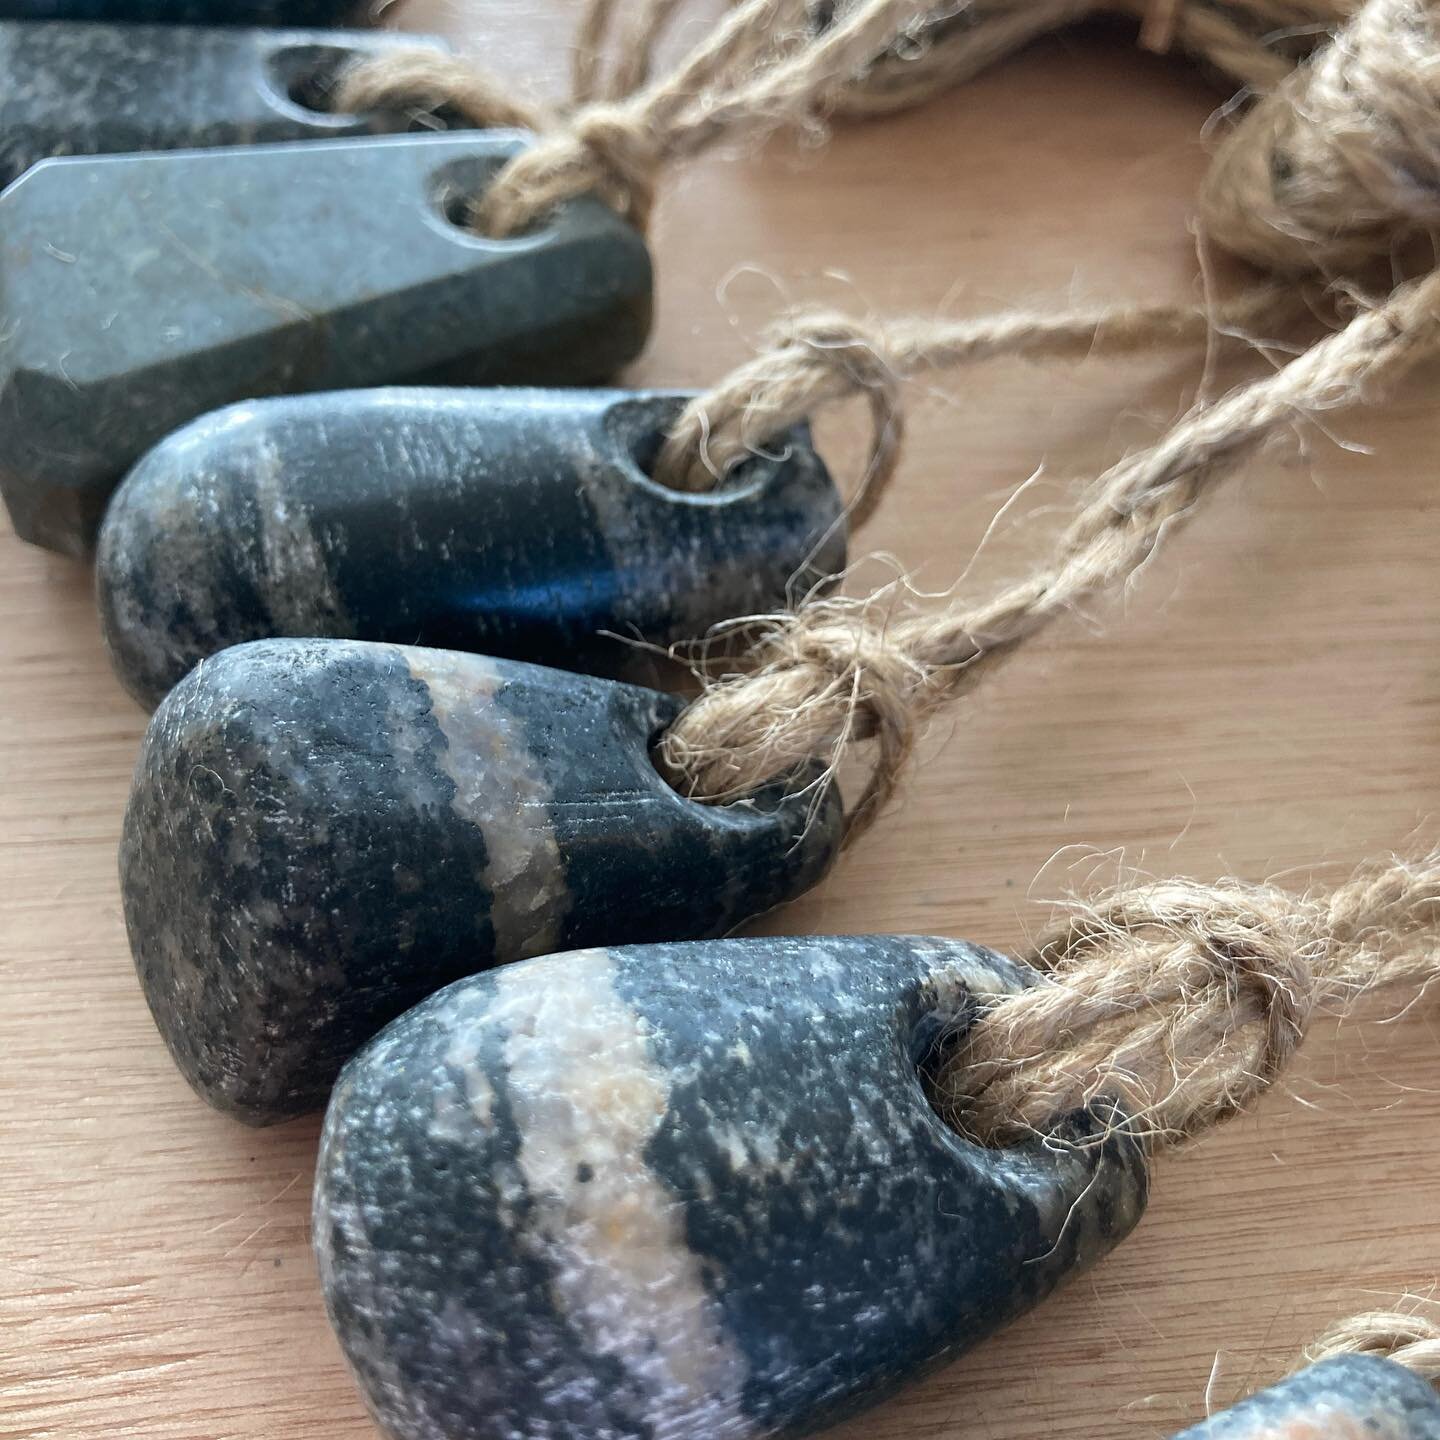 Sturdy Lewisian Gneiss light pulls, a great way to bring a little touch of the Hebrides into your home.

Natural stone, carved by hand in our home workshop.

www.gneiss-things.com/gneiss-home

15% off all web stock until 10th March -code &ldquo;TREAT